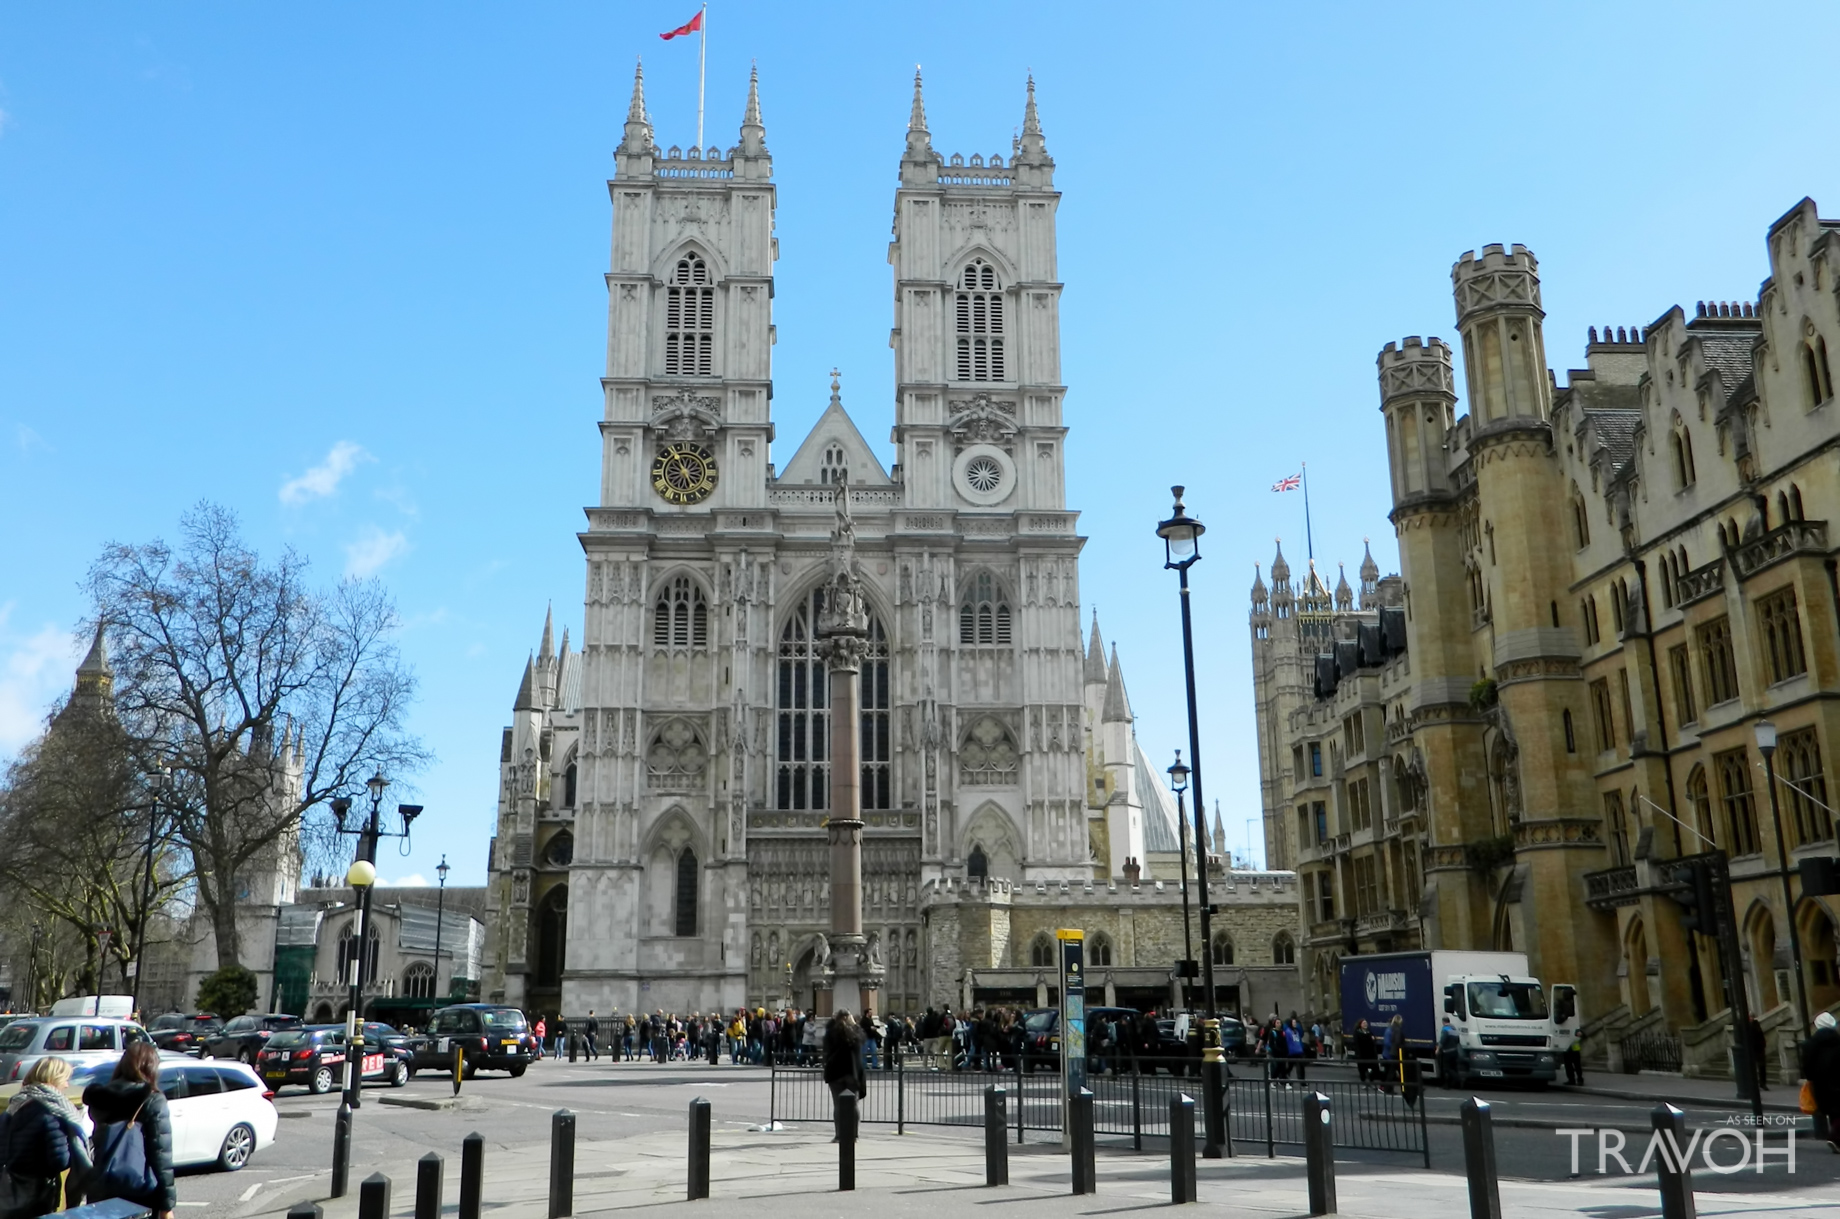 Westminster Abbey – 20 Deans Yd, Westminster, London, United Kingdom